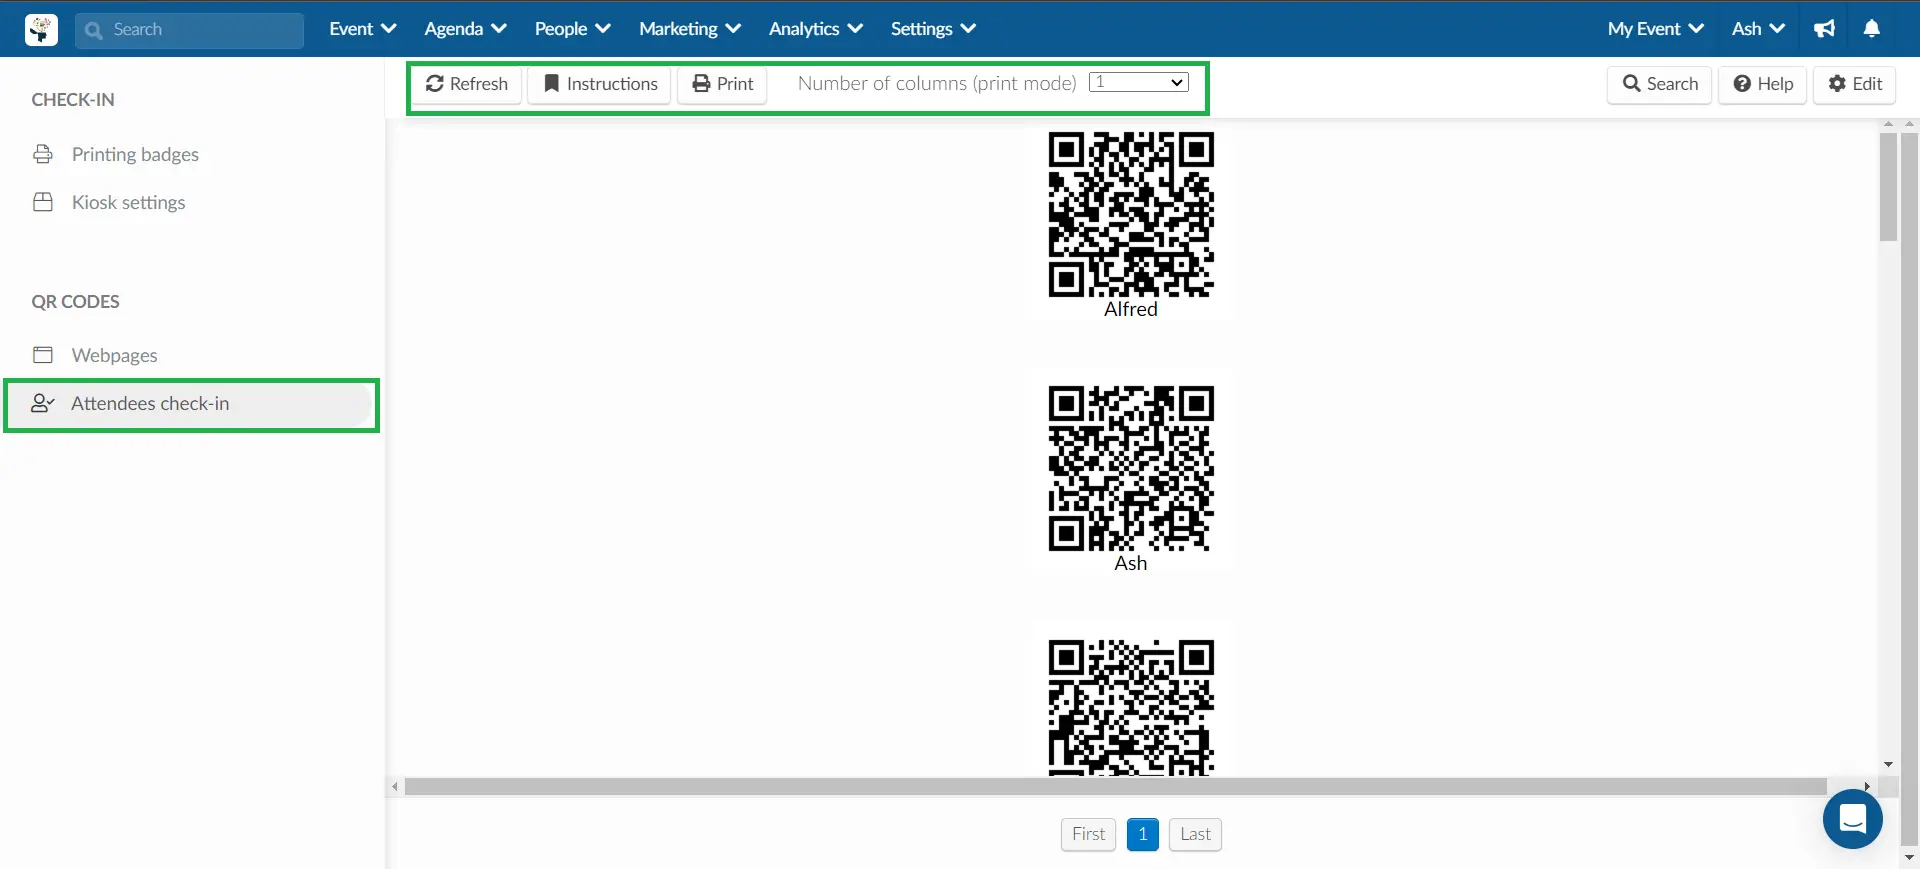 Screenshot showing the QR Codes > Attendees check-in section.